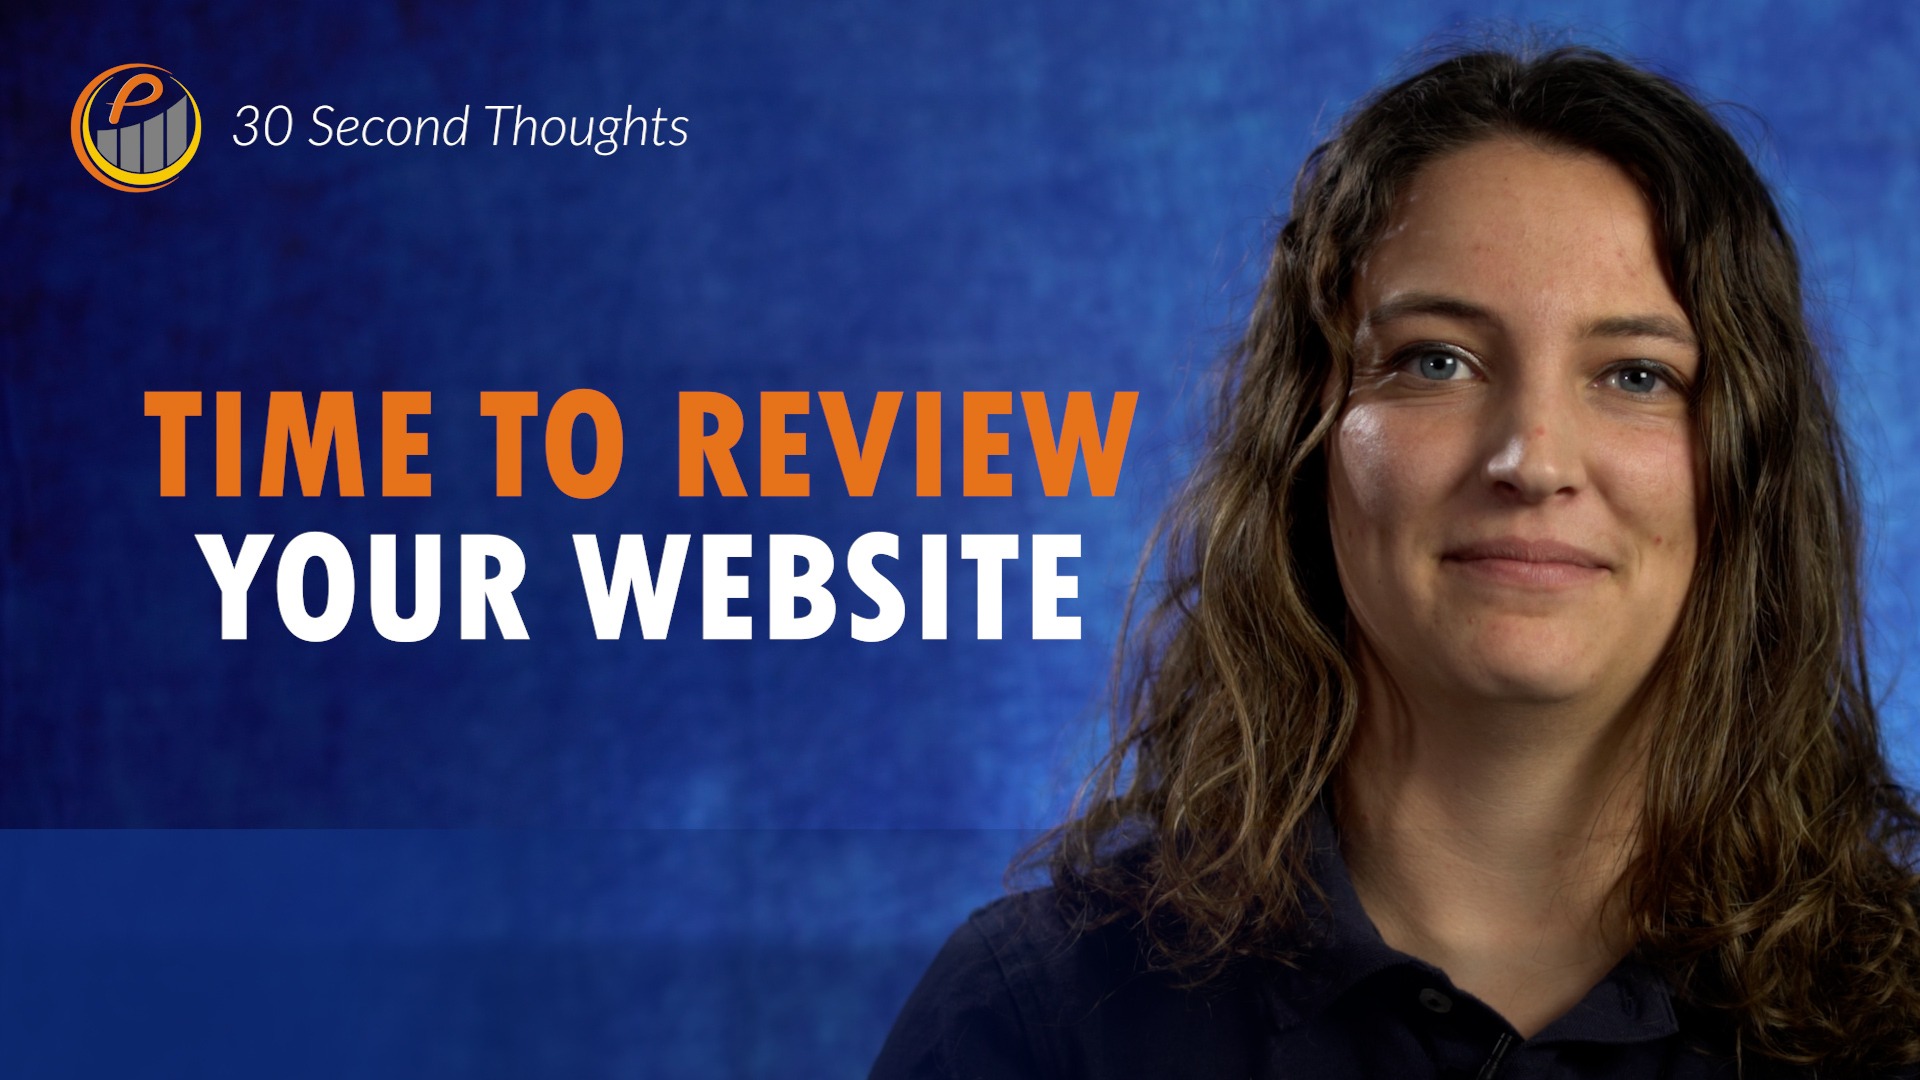 Time to Review Your Website